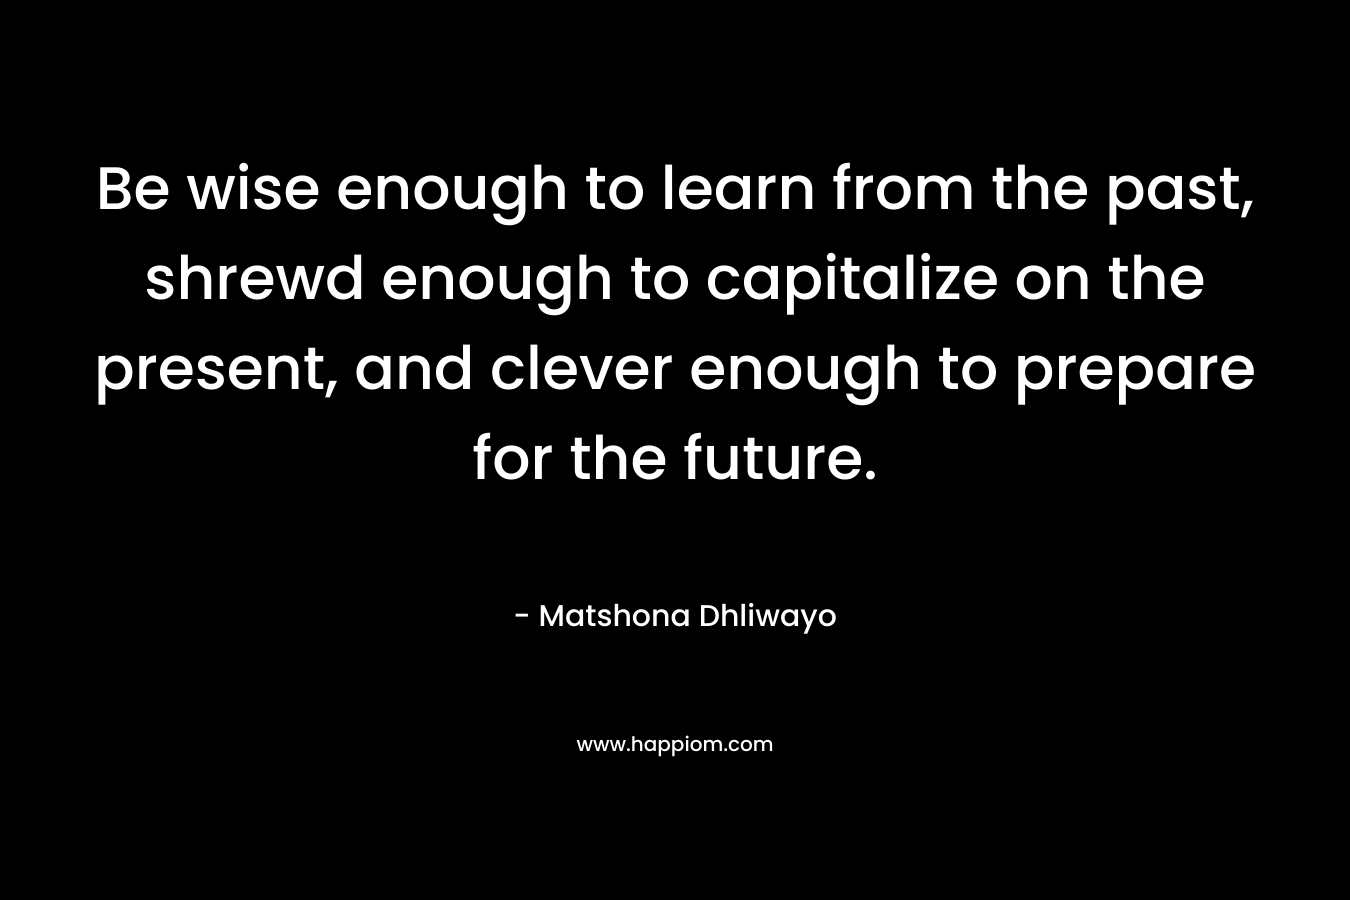 Be wise enough to learn from the past, shrewd enough to capitalize on the present, and clever enough to prepare for the future. – Matshona Dhliwayo